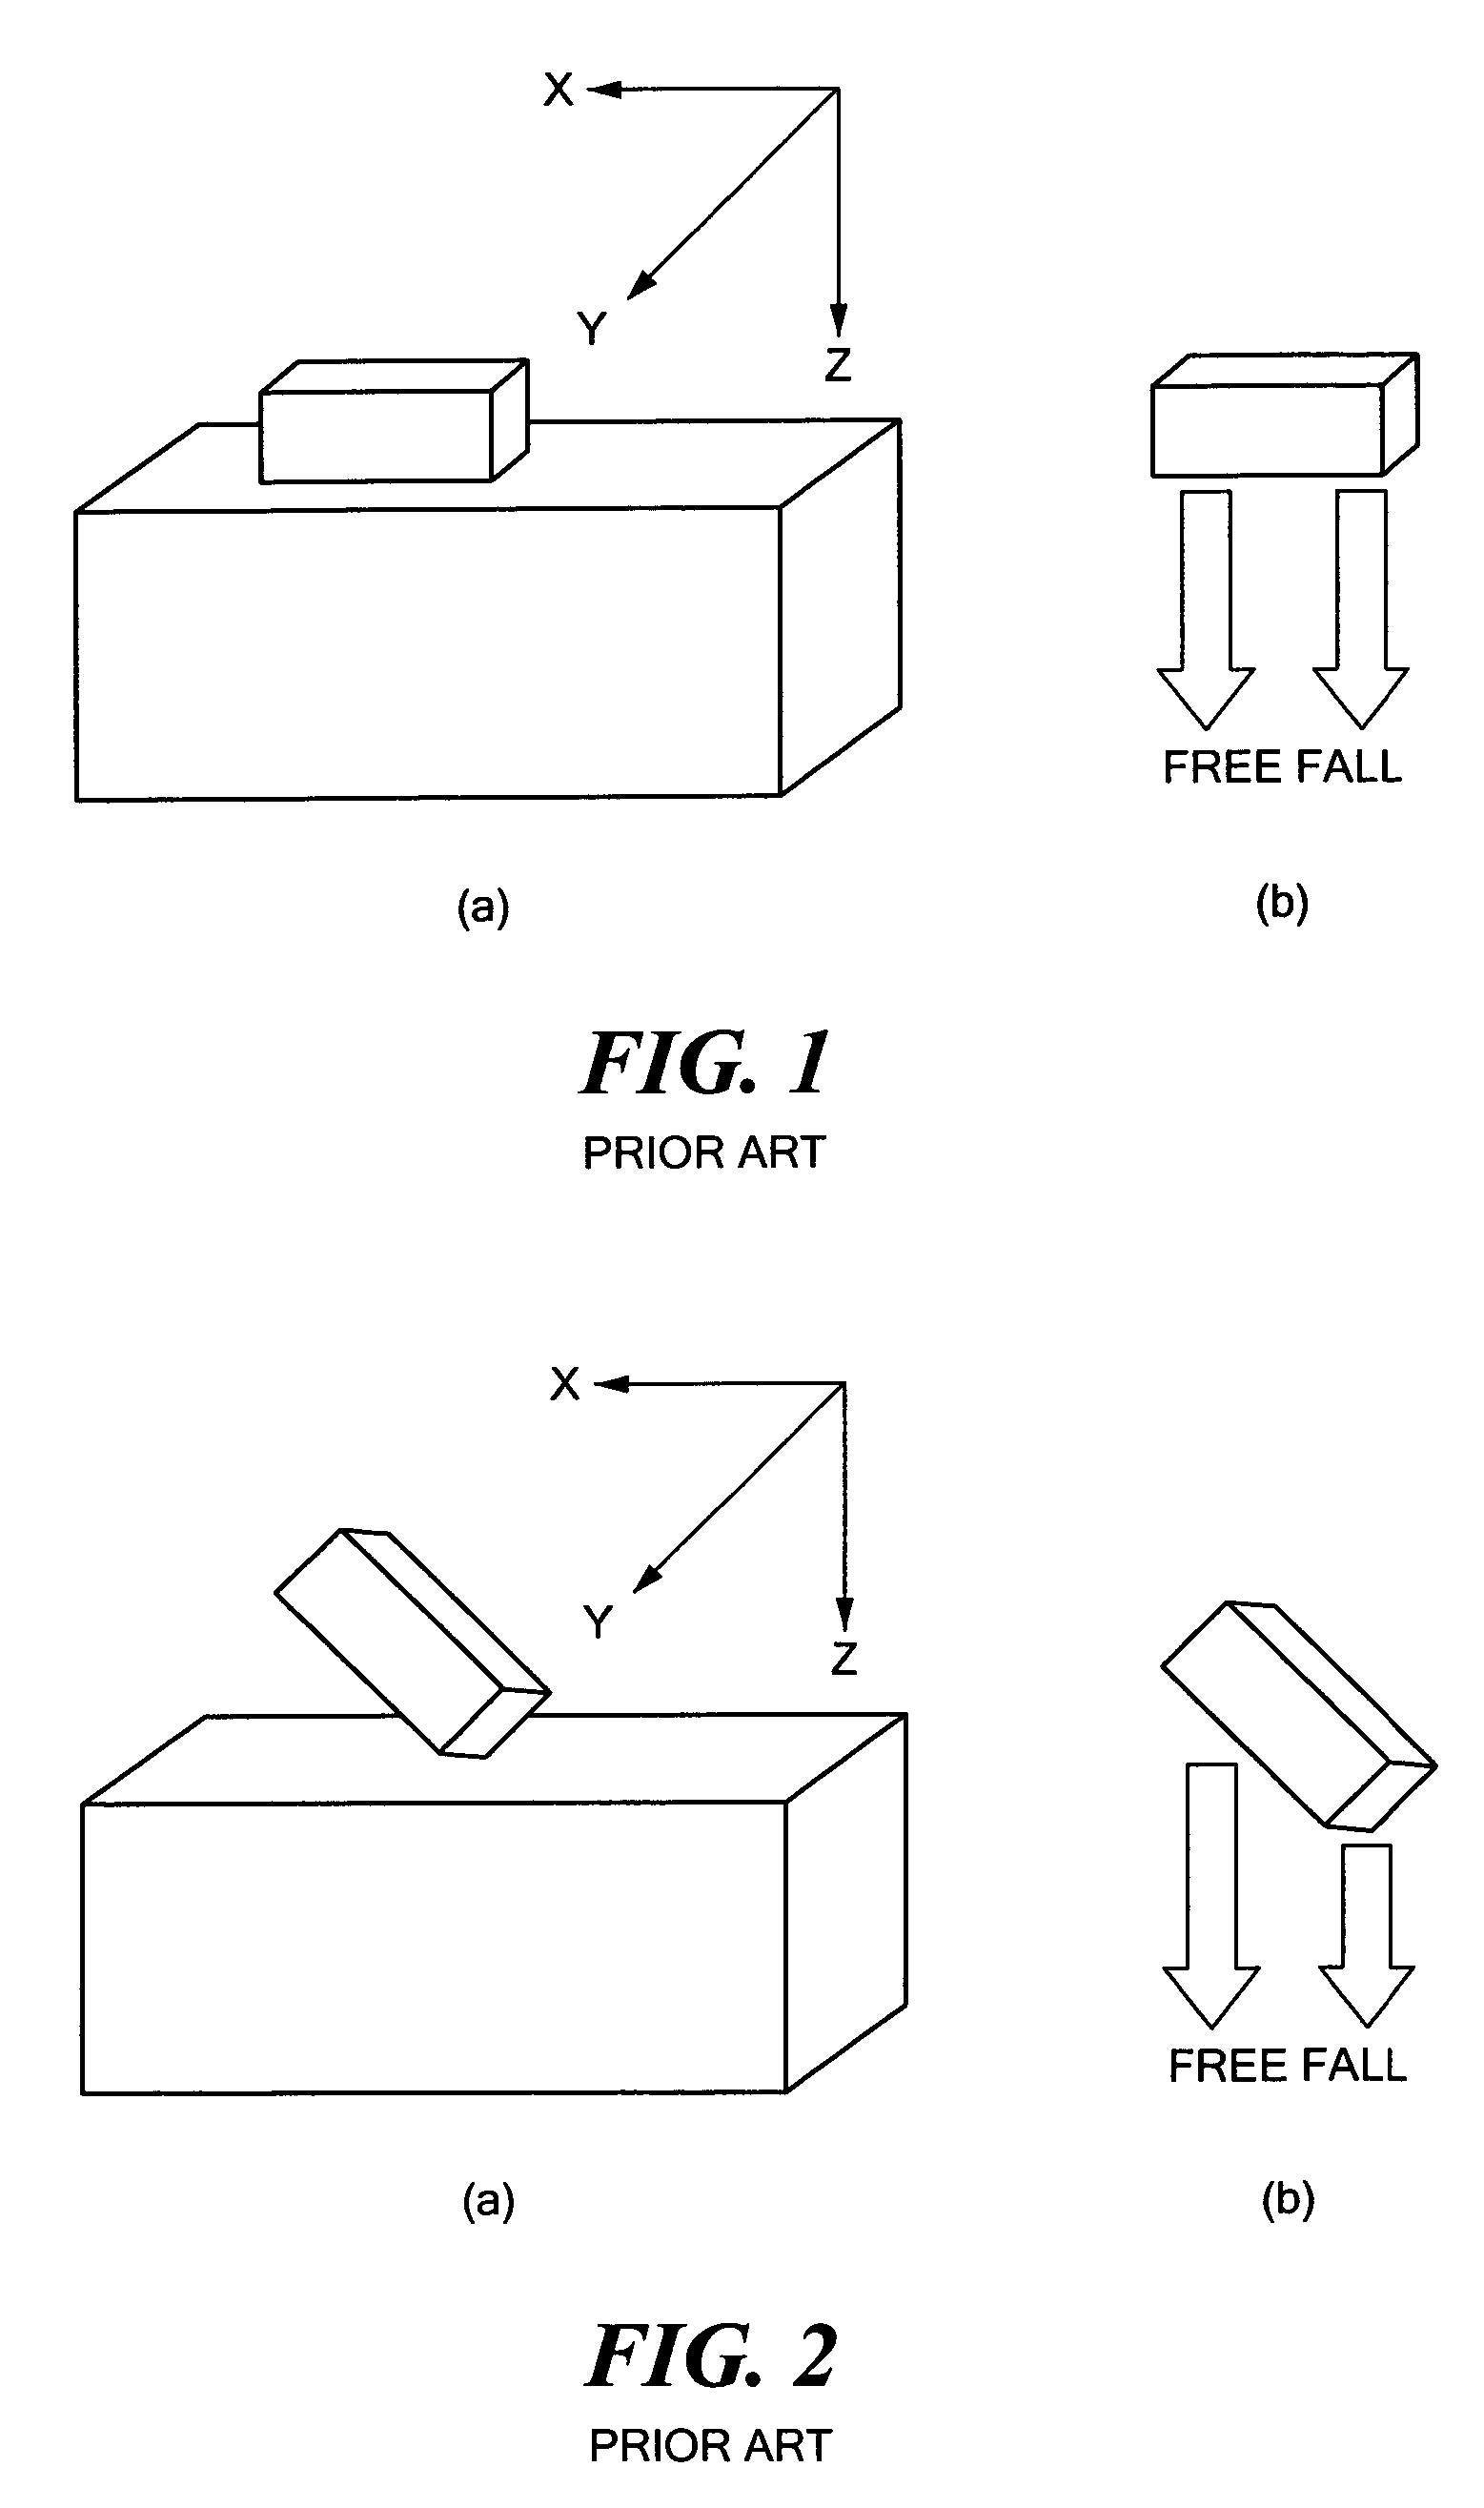 Accelerometer-based differential free fall detection system, apparatus, and method and disk drive protection mechanism employing same